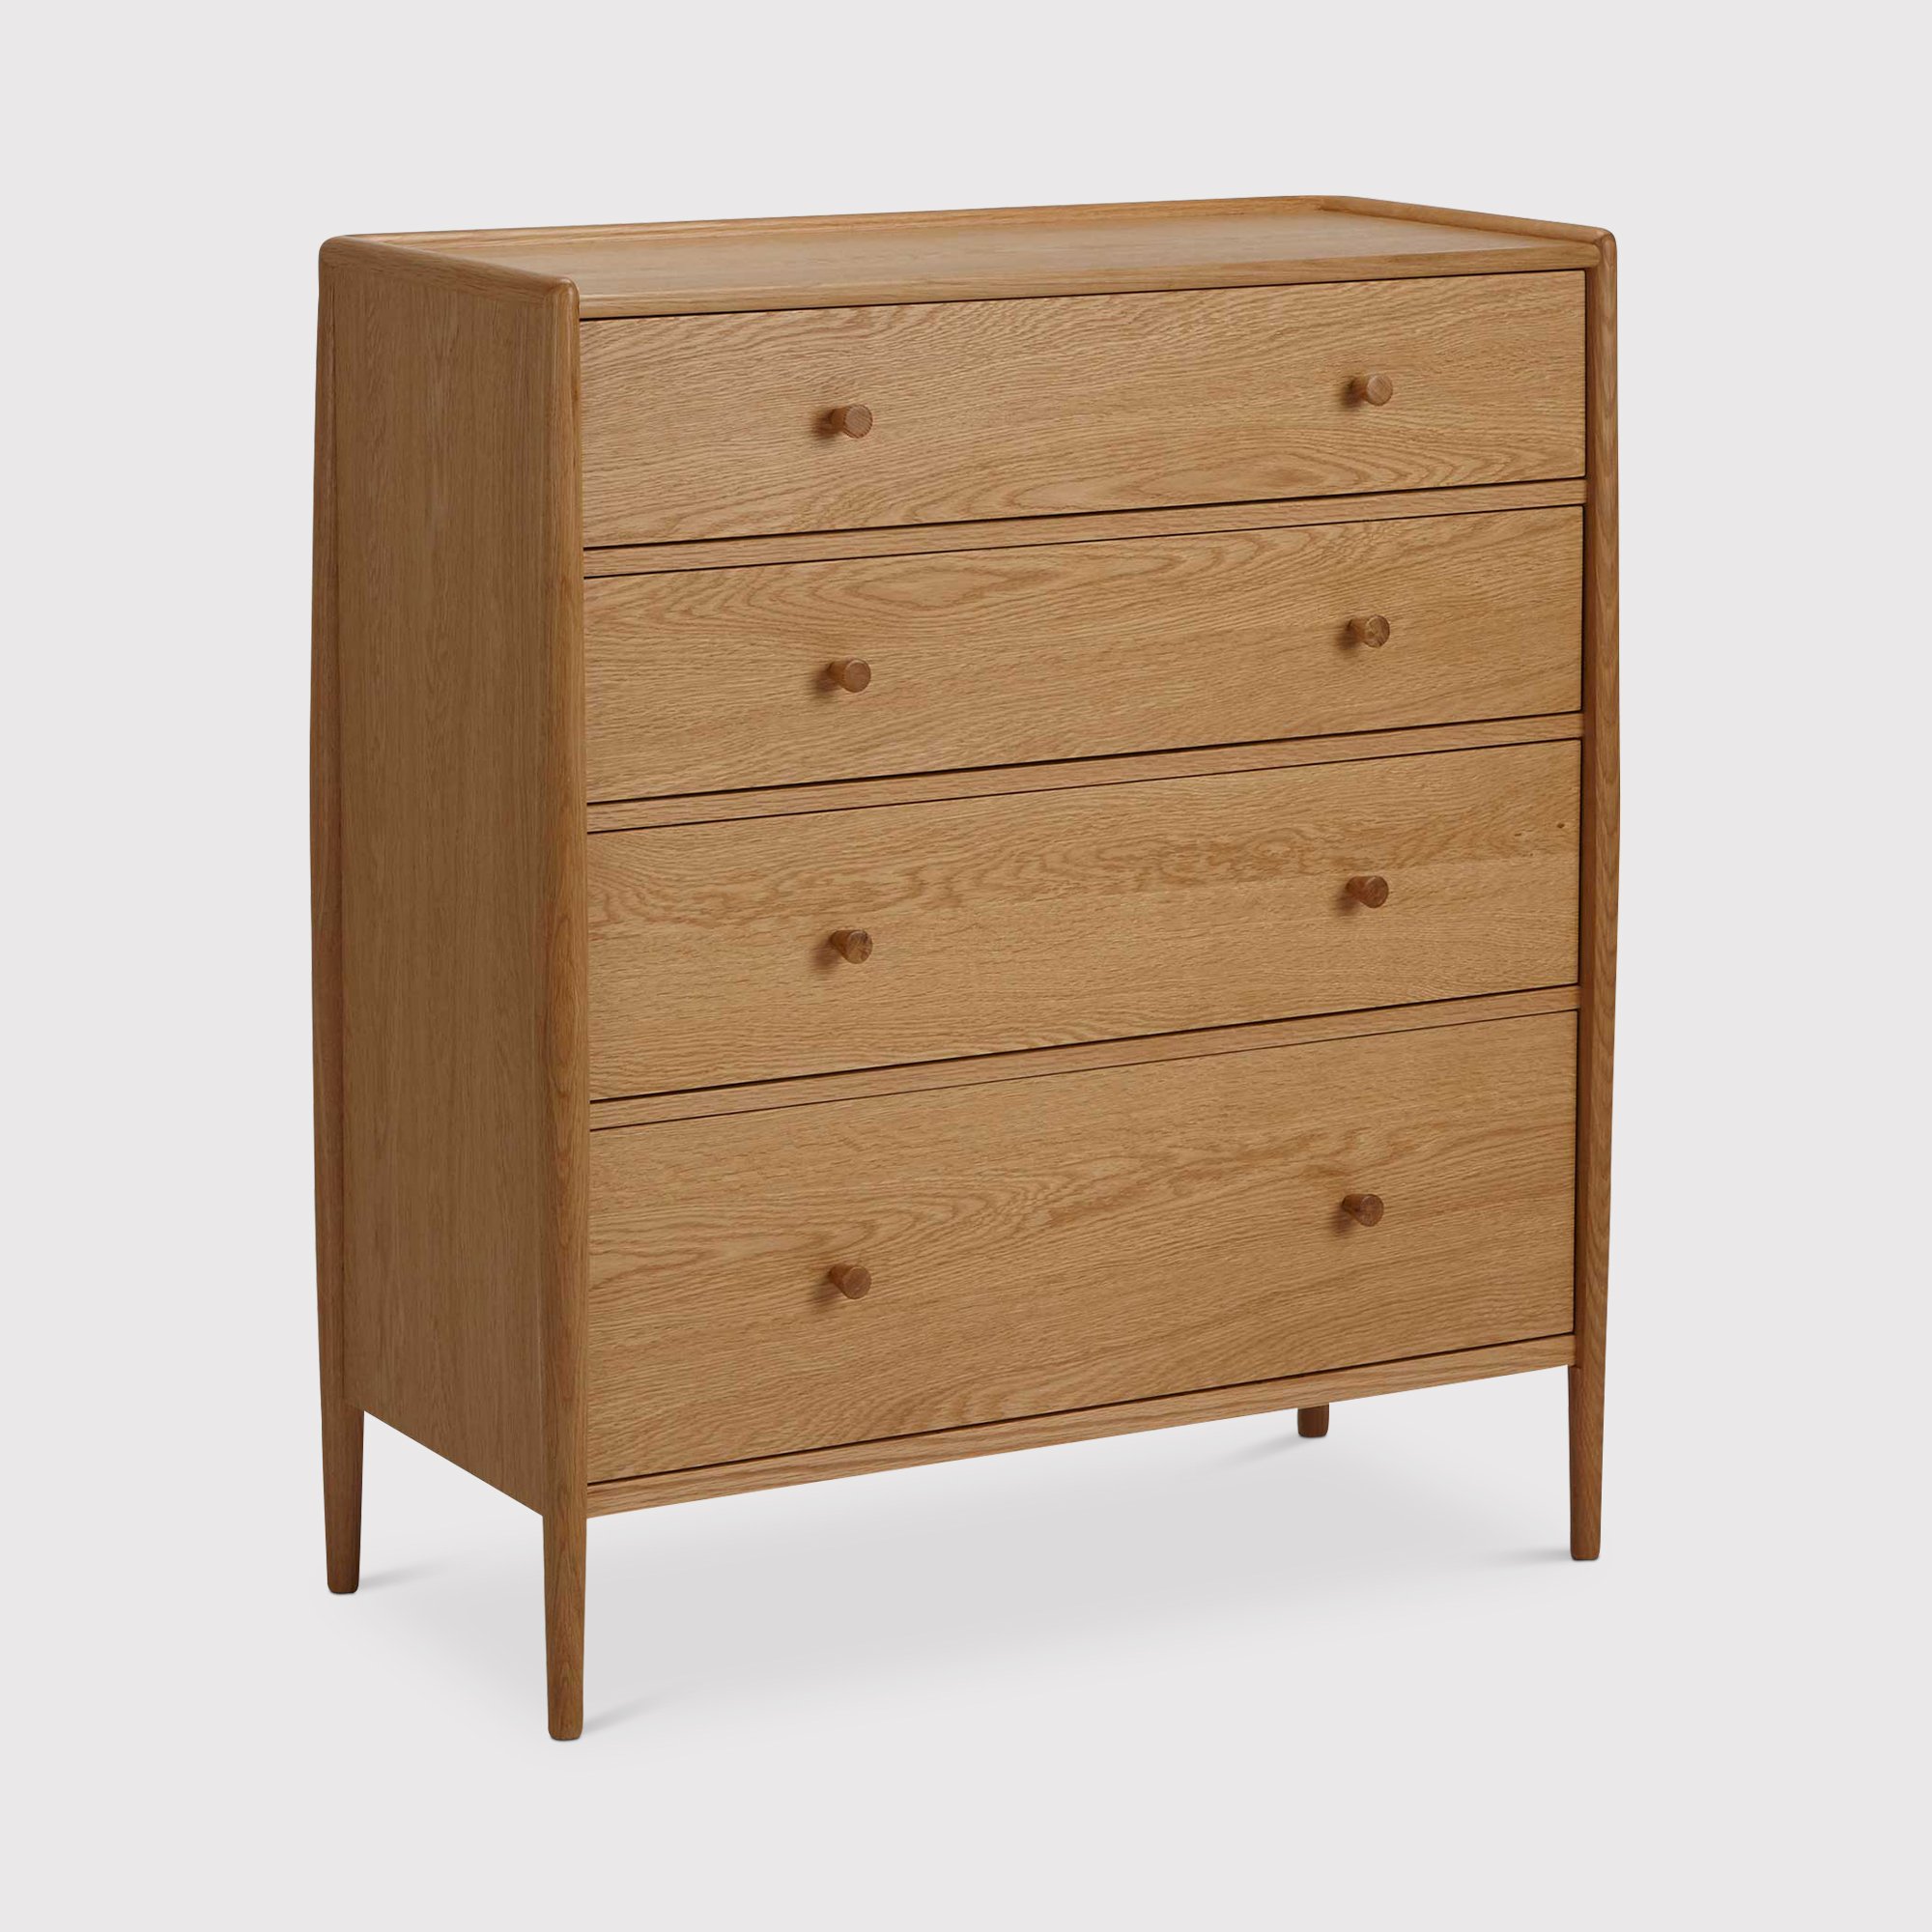 Ercol Winslow 4 Drawer Chest, Neutral | Barker & Stonehouse